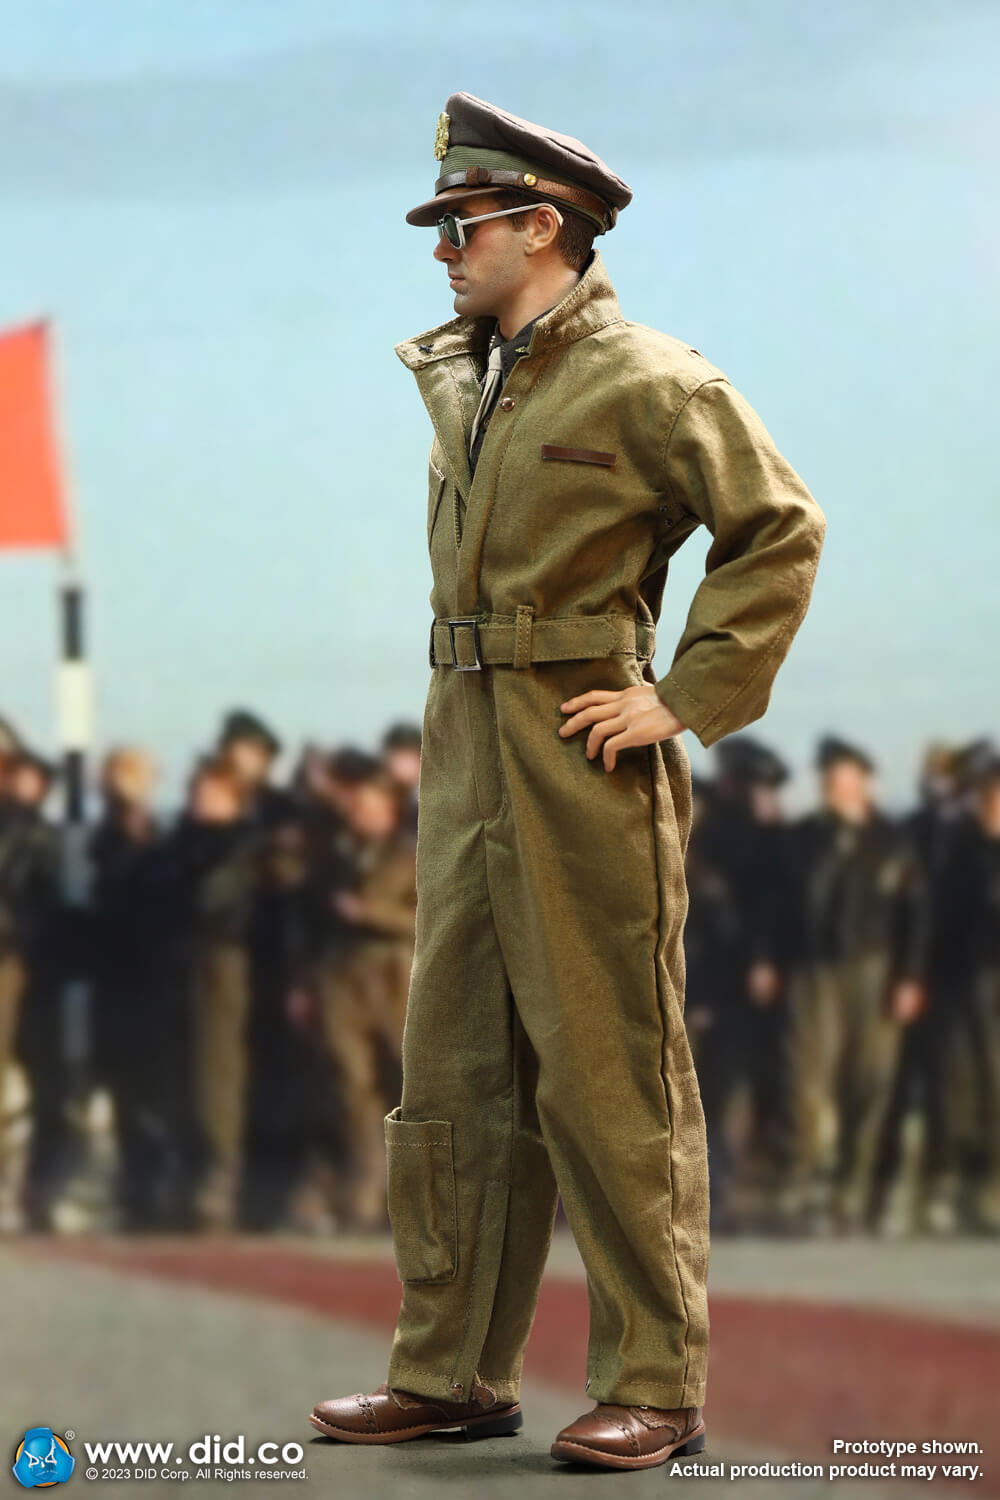 military - NEW PRODUCT: DiD: A80167 WWII United States Army Air Forces Pilot – Captain Rafe 3518